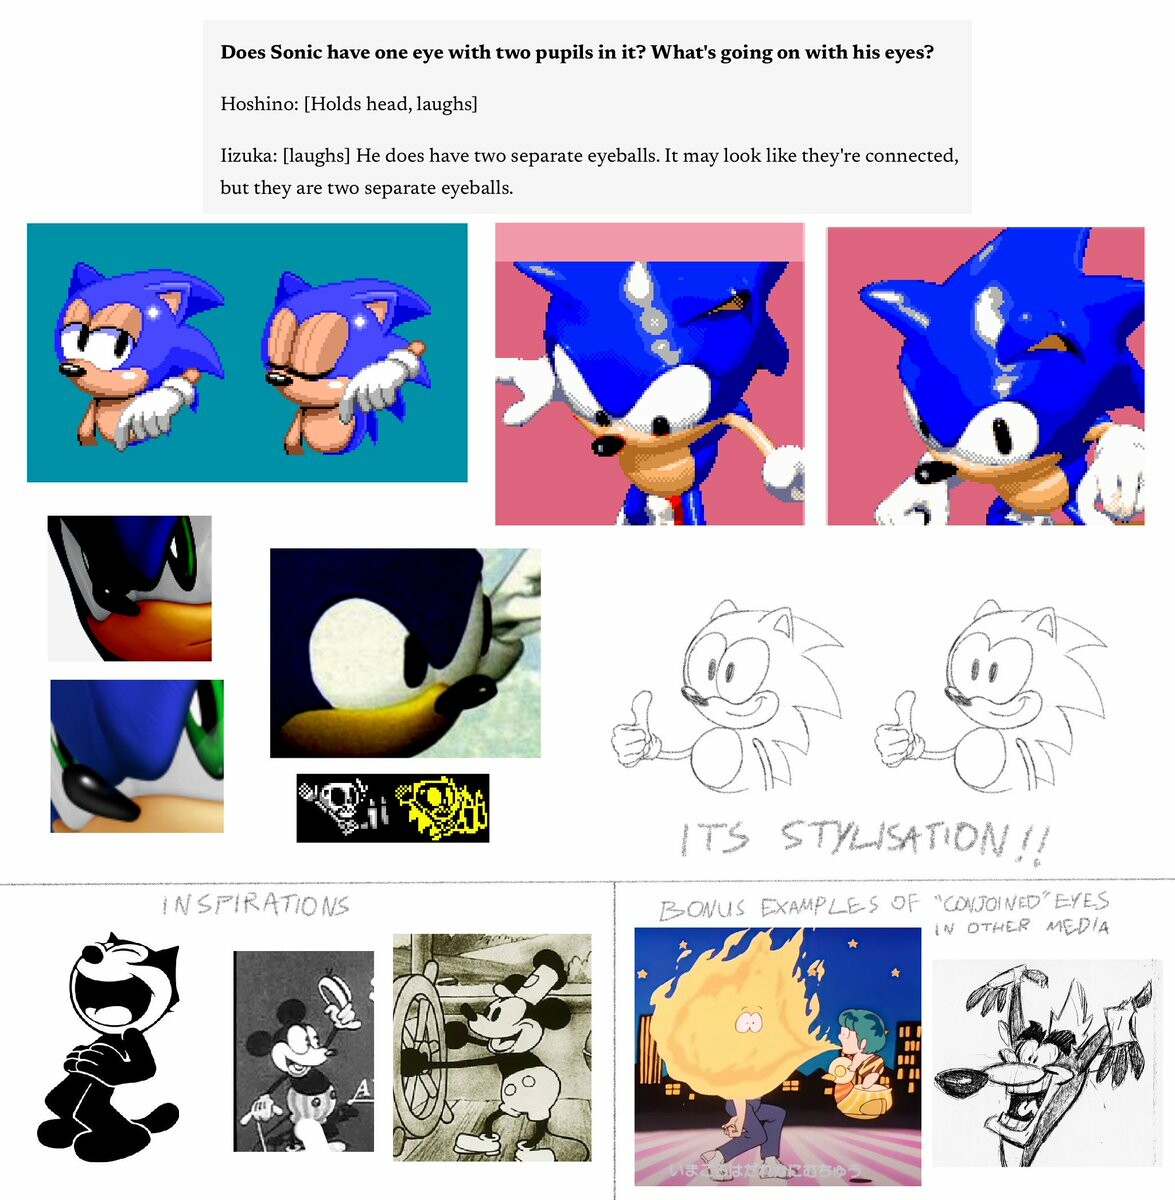 How Many Eyes Does Sonic Really Have?